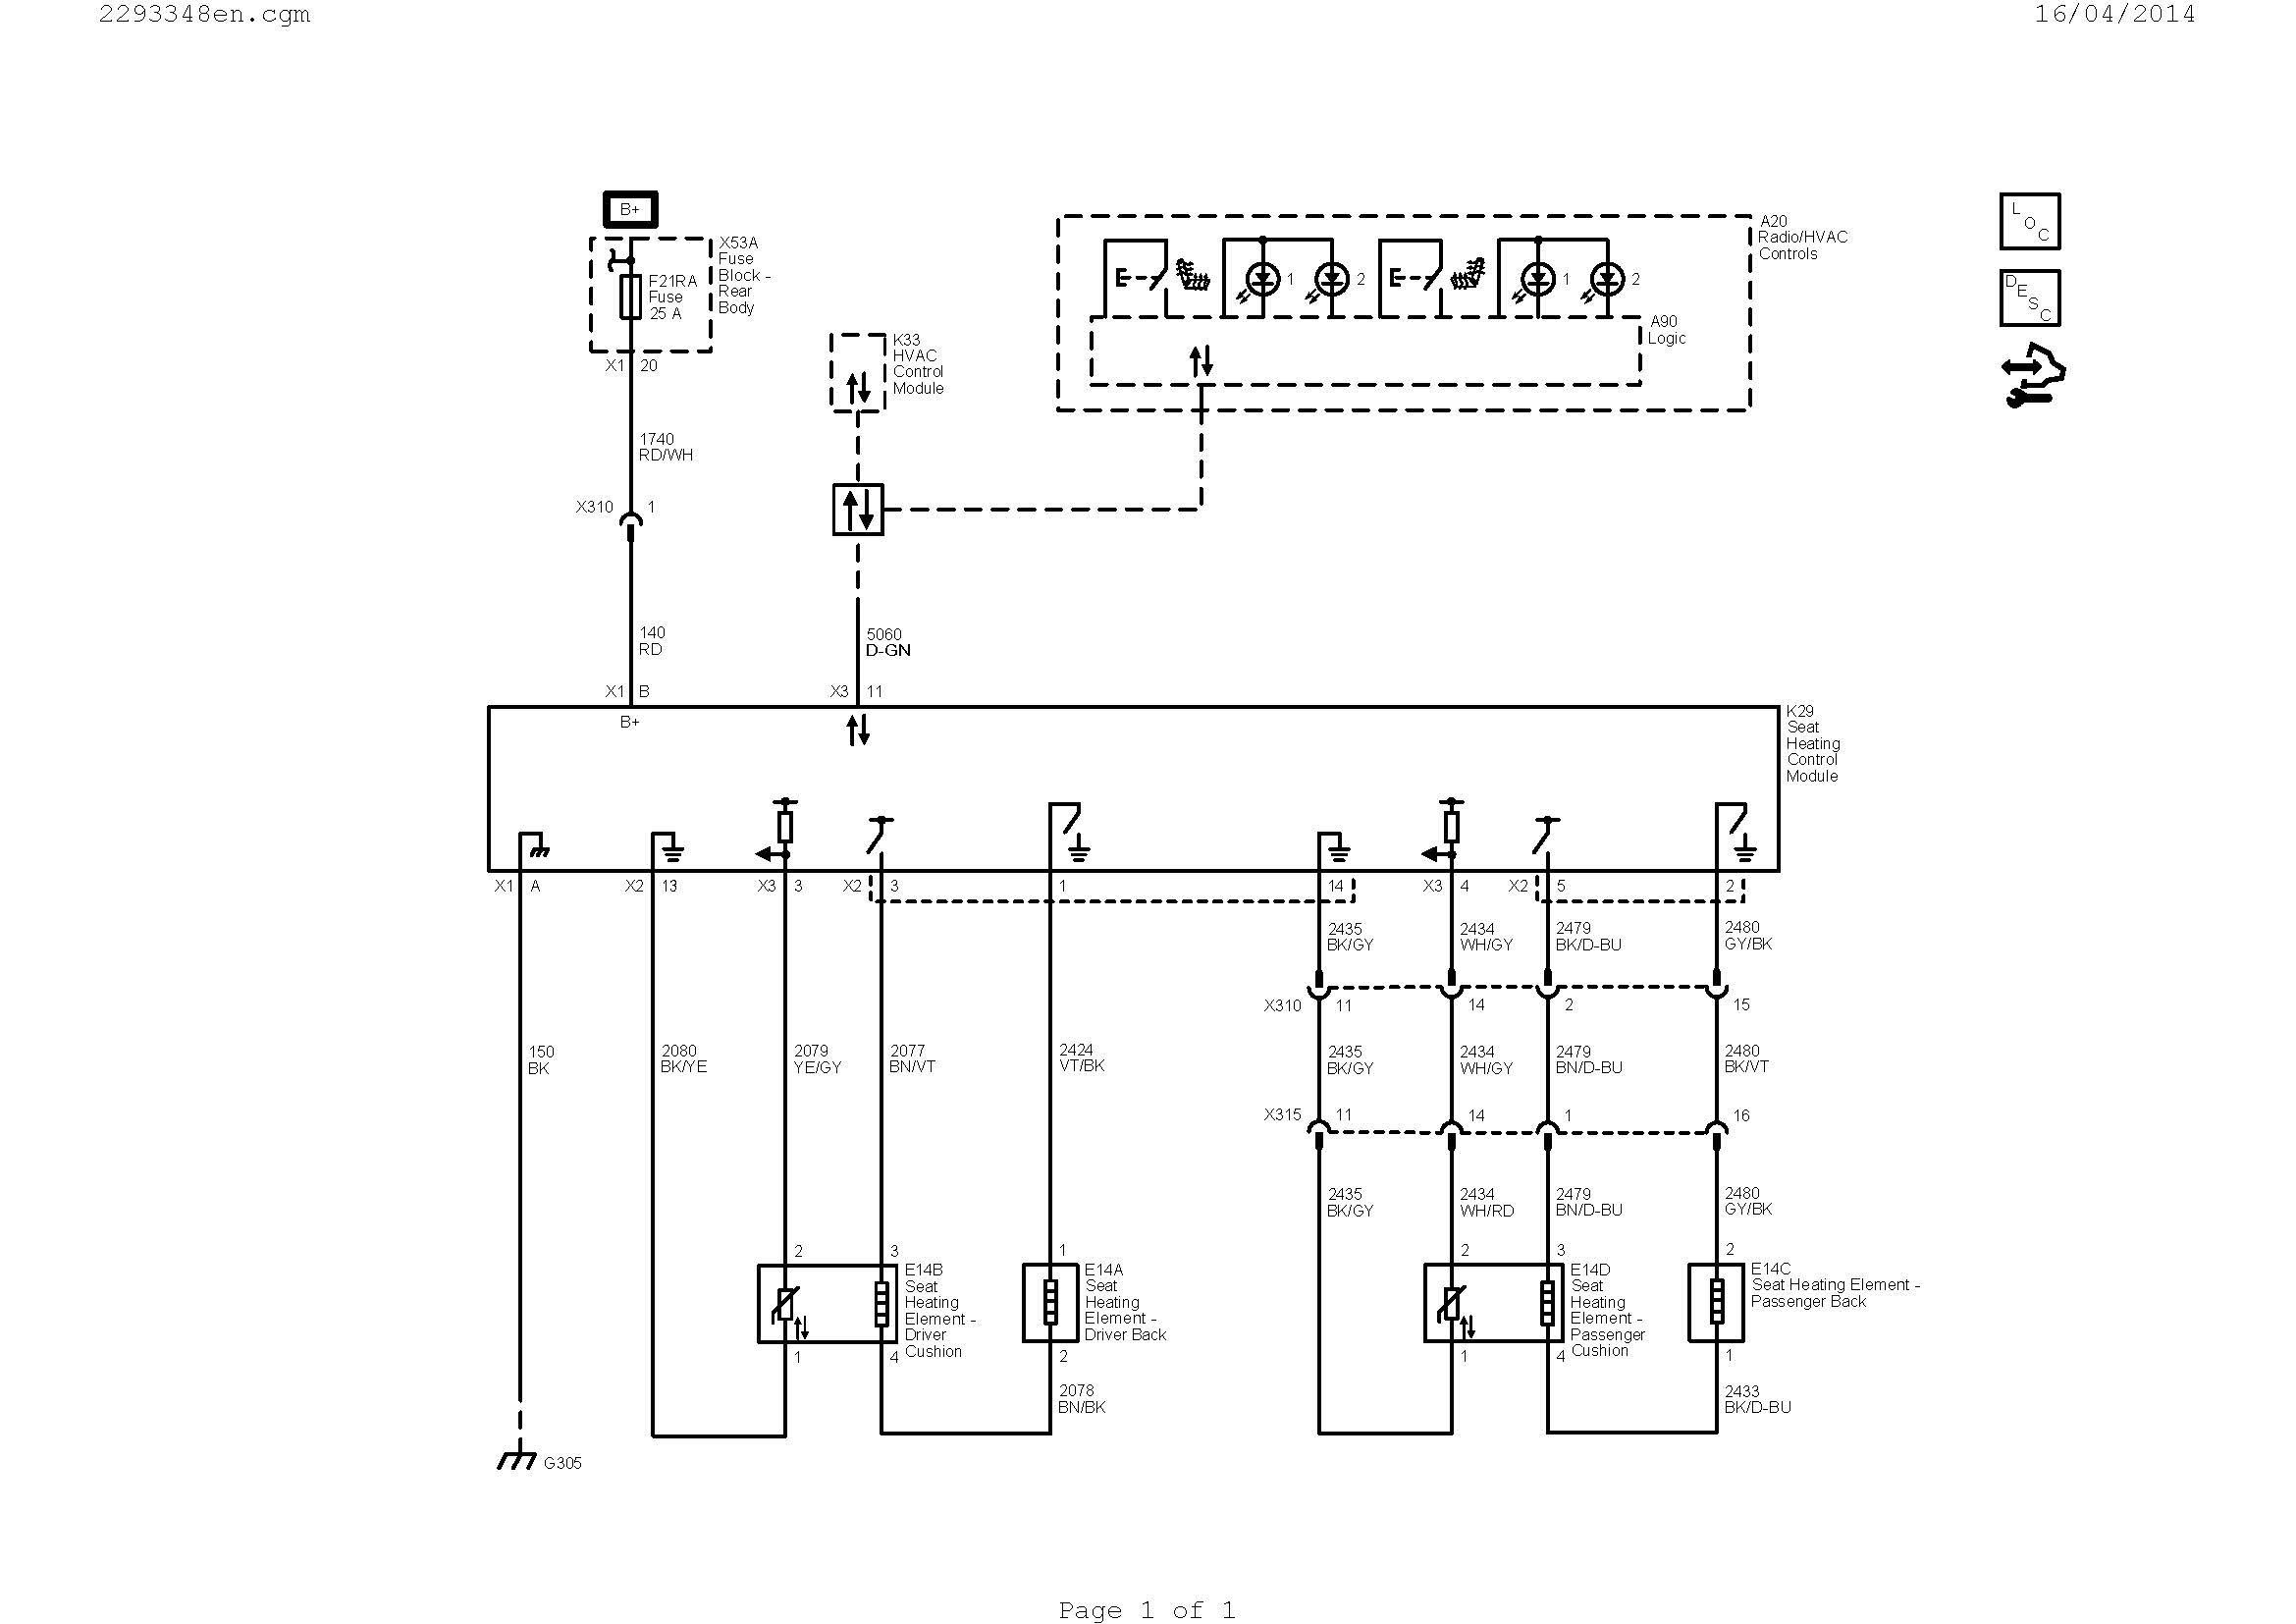 Wiring A Ac thermostat Diagram New Wiring Diagram Ac Valid Hvac Home thermostat Wiring Diagram